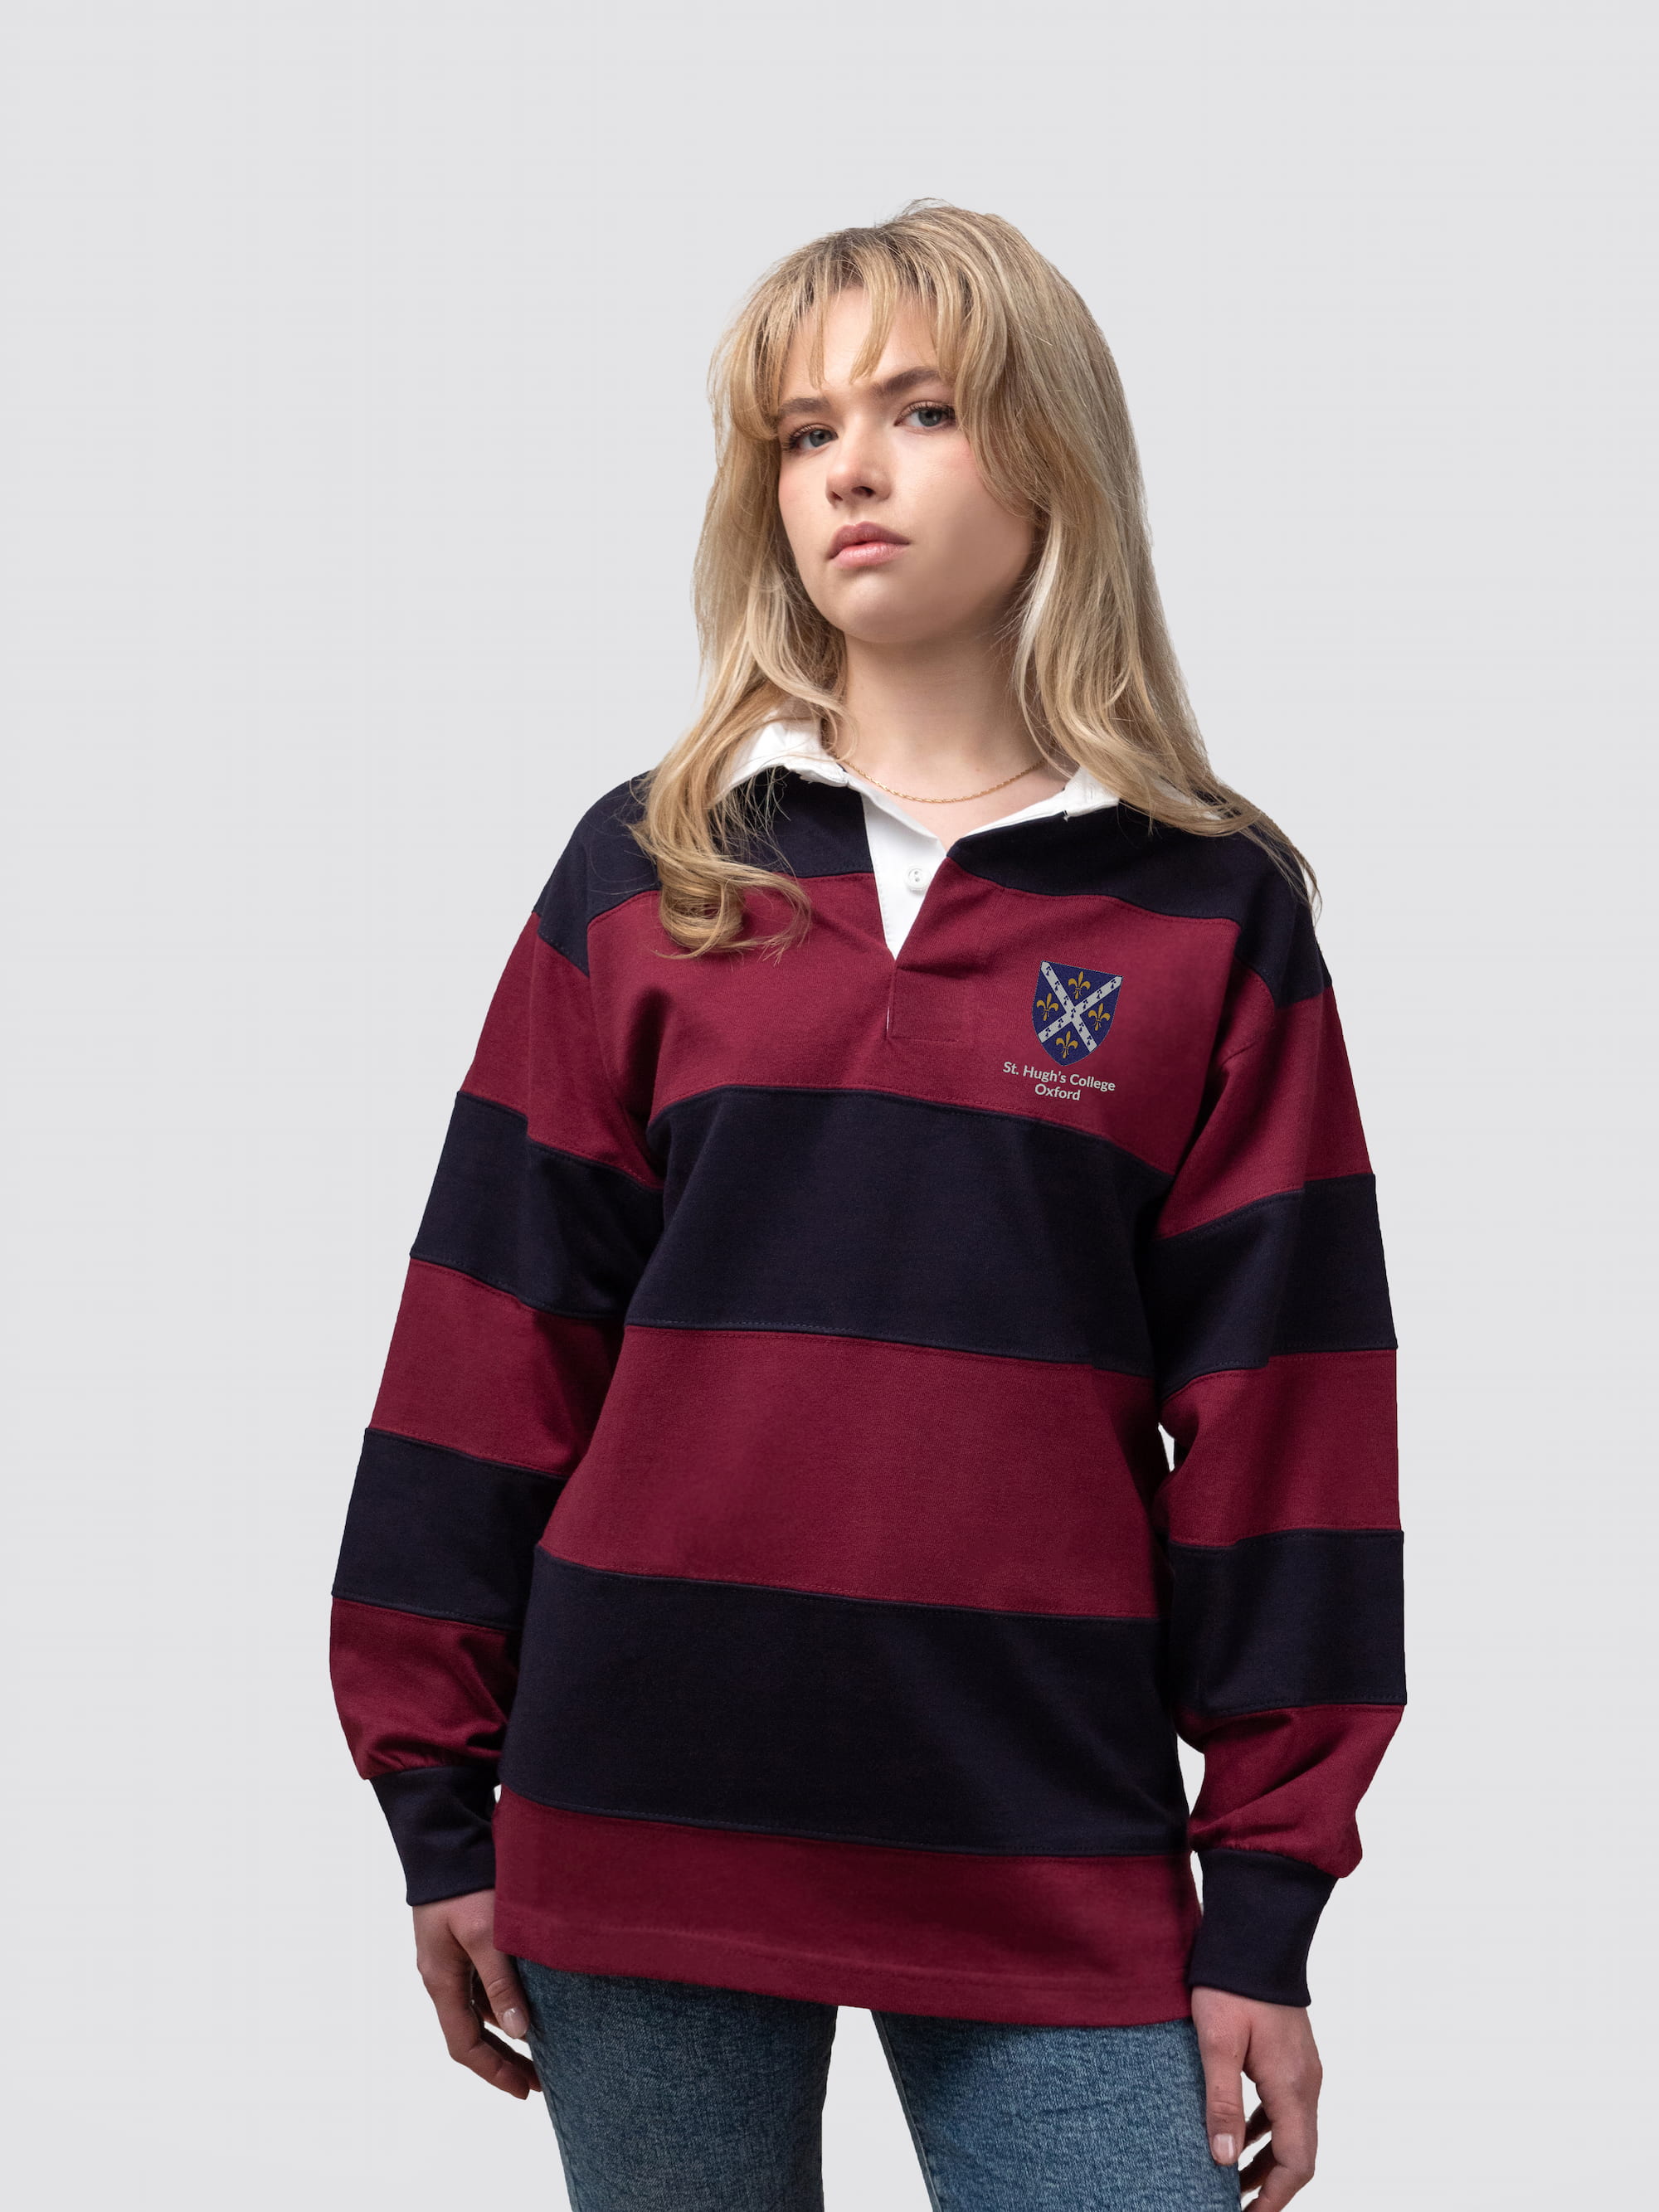 St Hugh's College rugby shirt, with burgundy and navy stripes